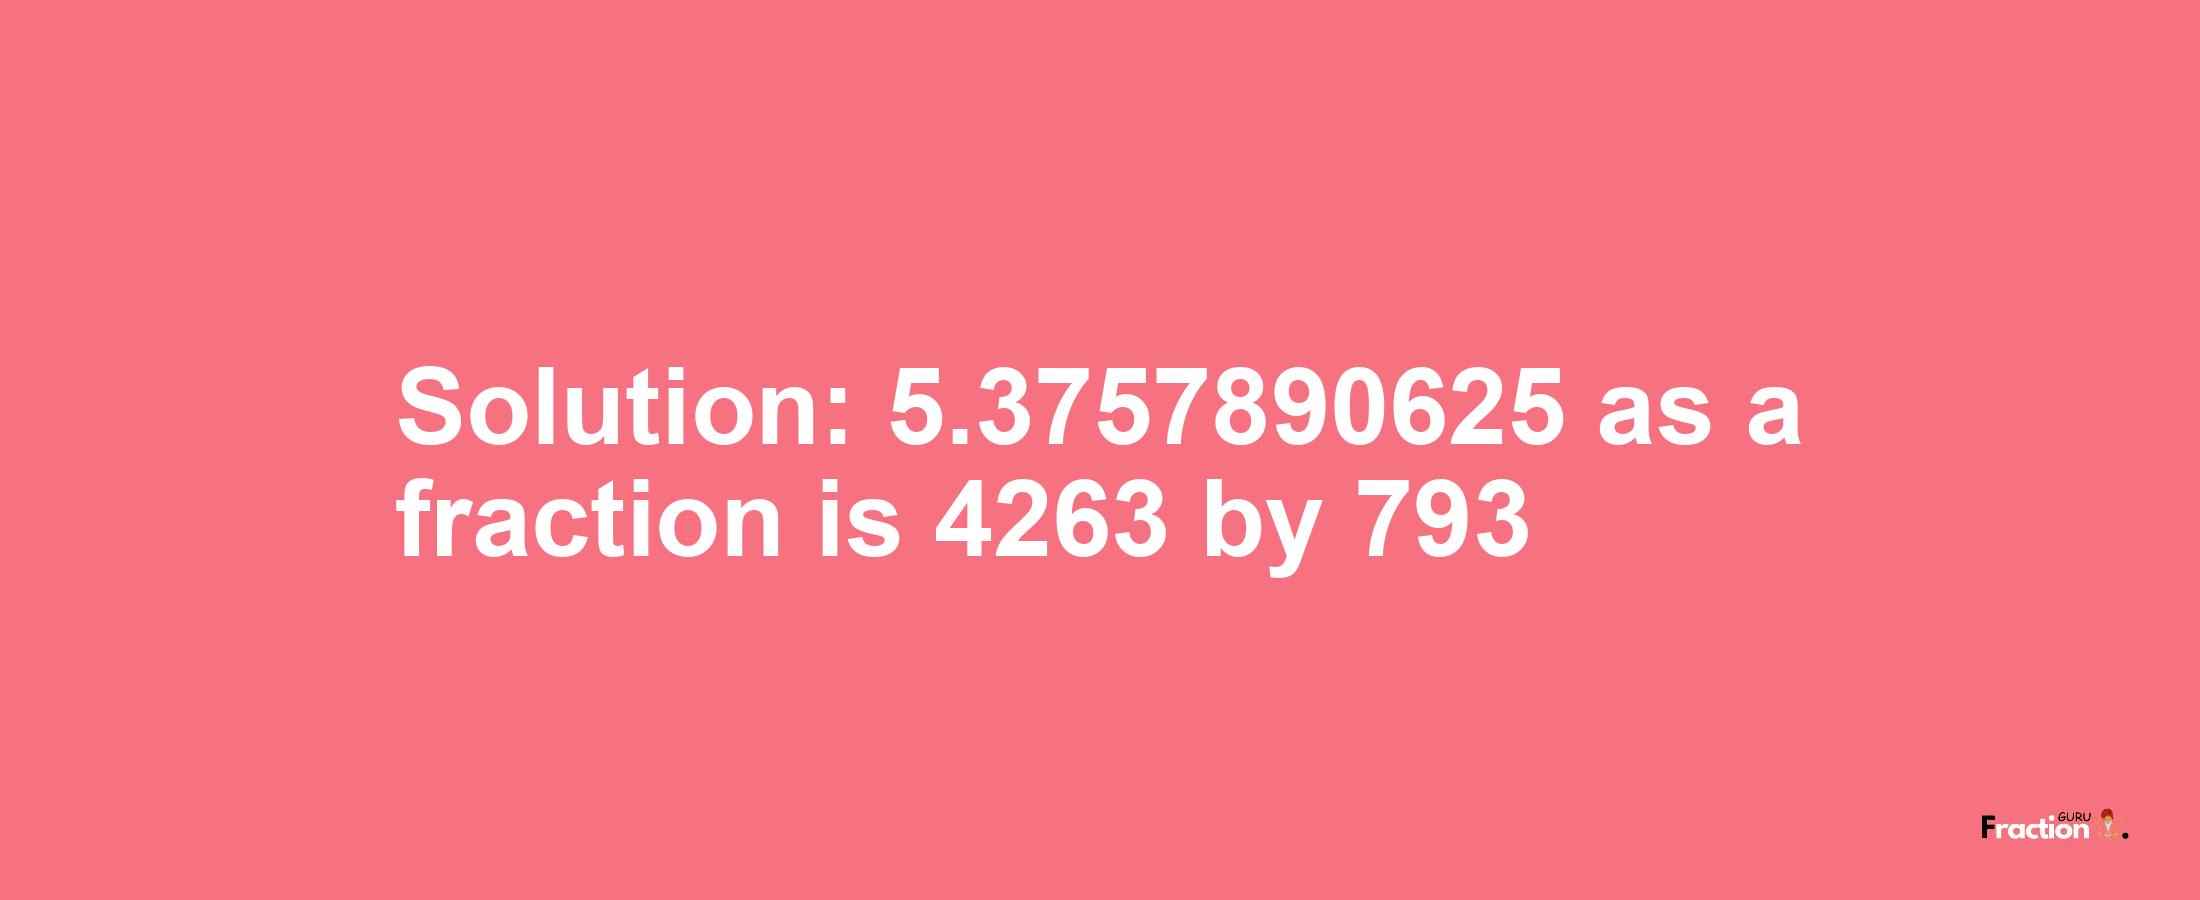 Solution:5.3757890625 as a fraction is 4263/793